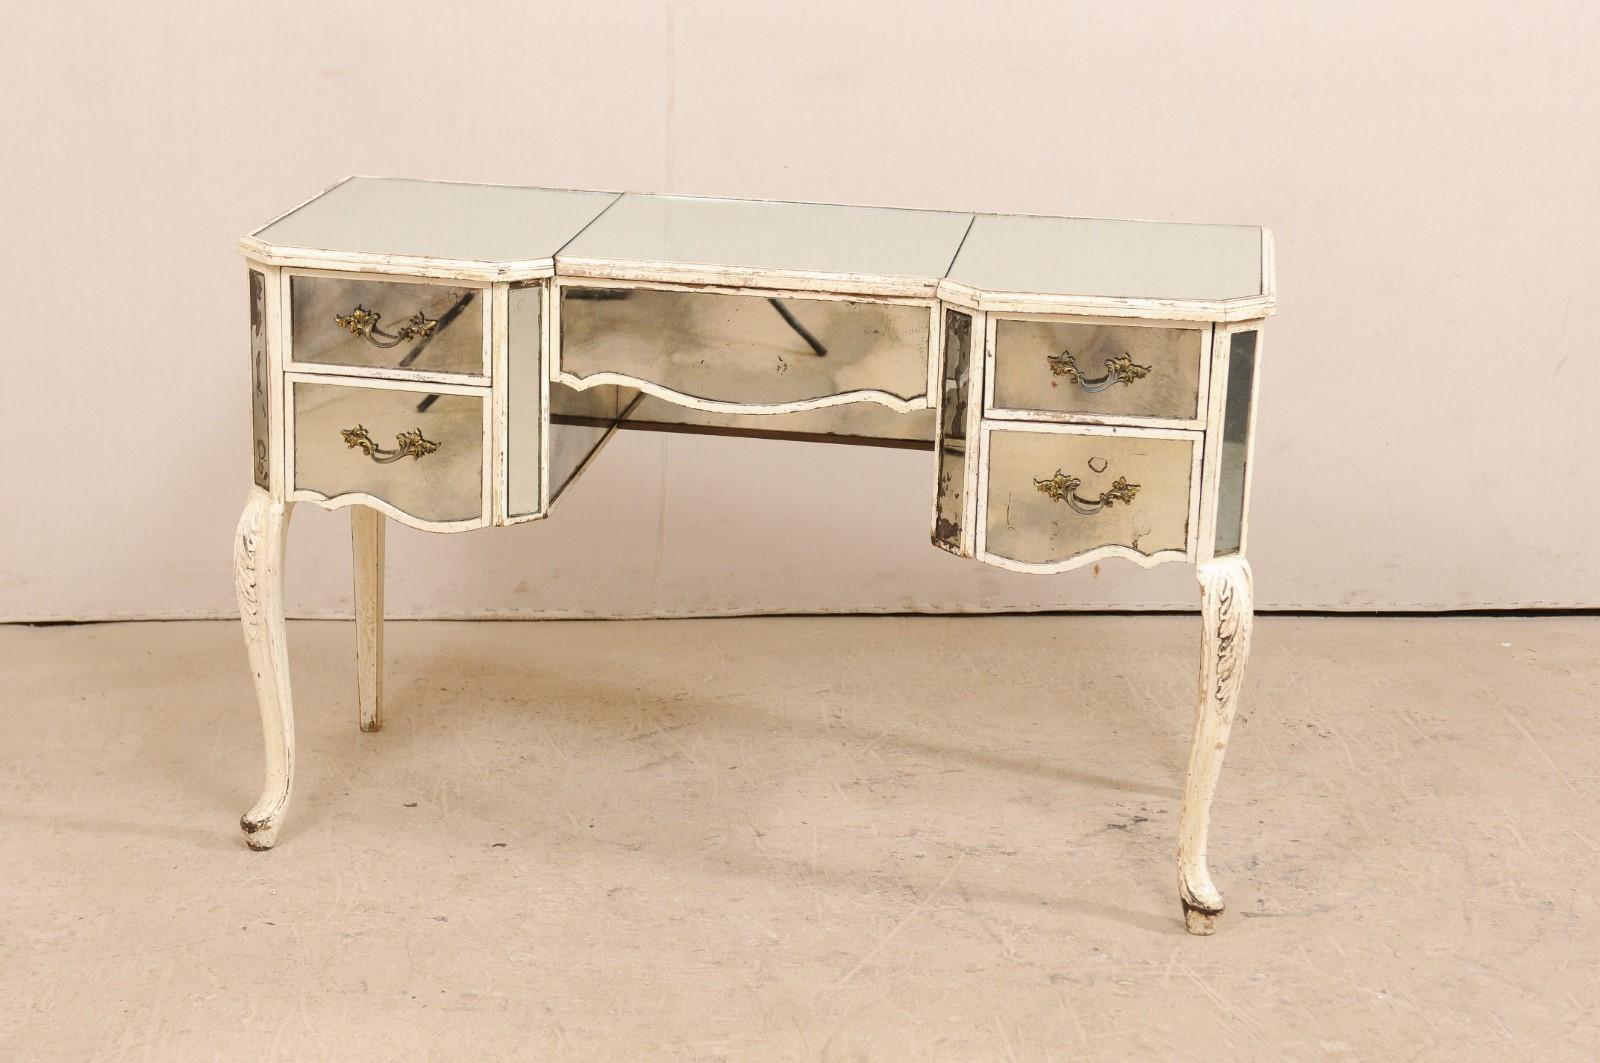 A French mid-century mirrored dressing table. This beautiful French vanity is adorned in a mirrored exterior, with sweetly designed lines, canted side posts, accented with old white paint, and presented upon slender cabriole legs with acanthus